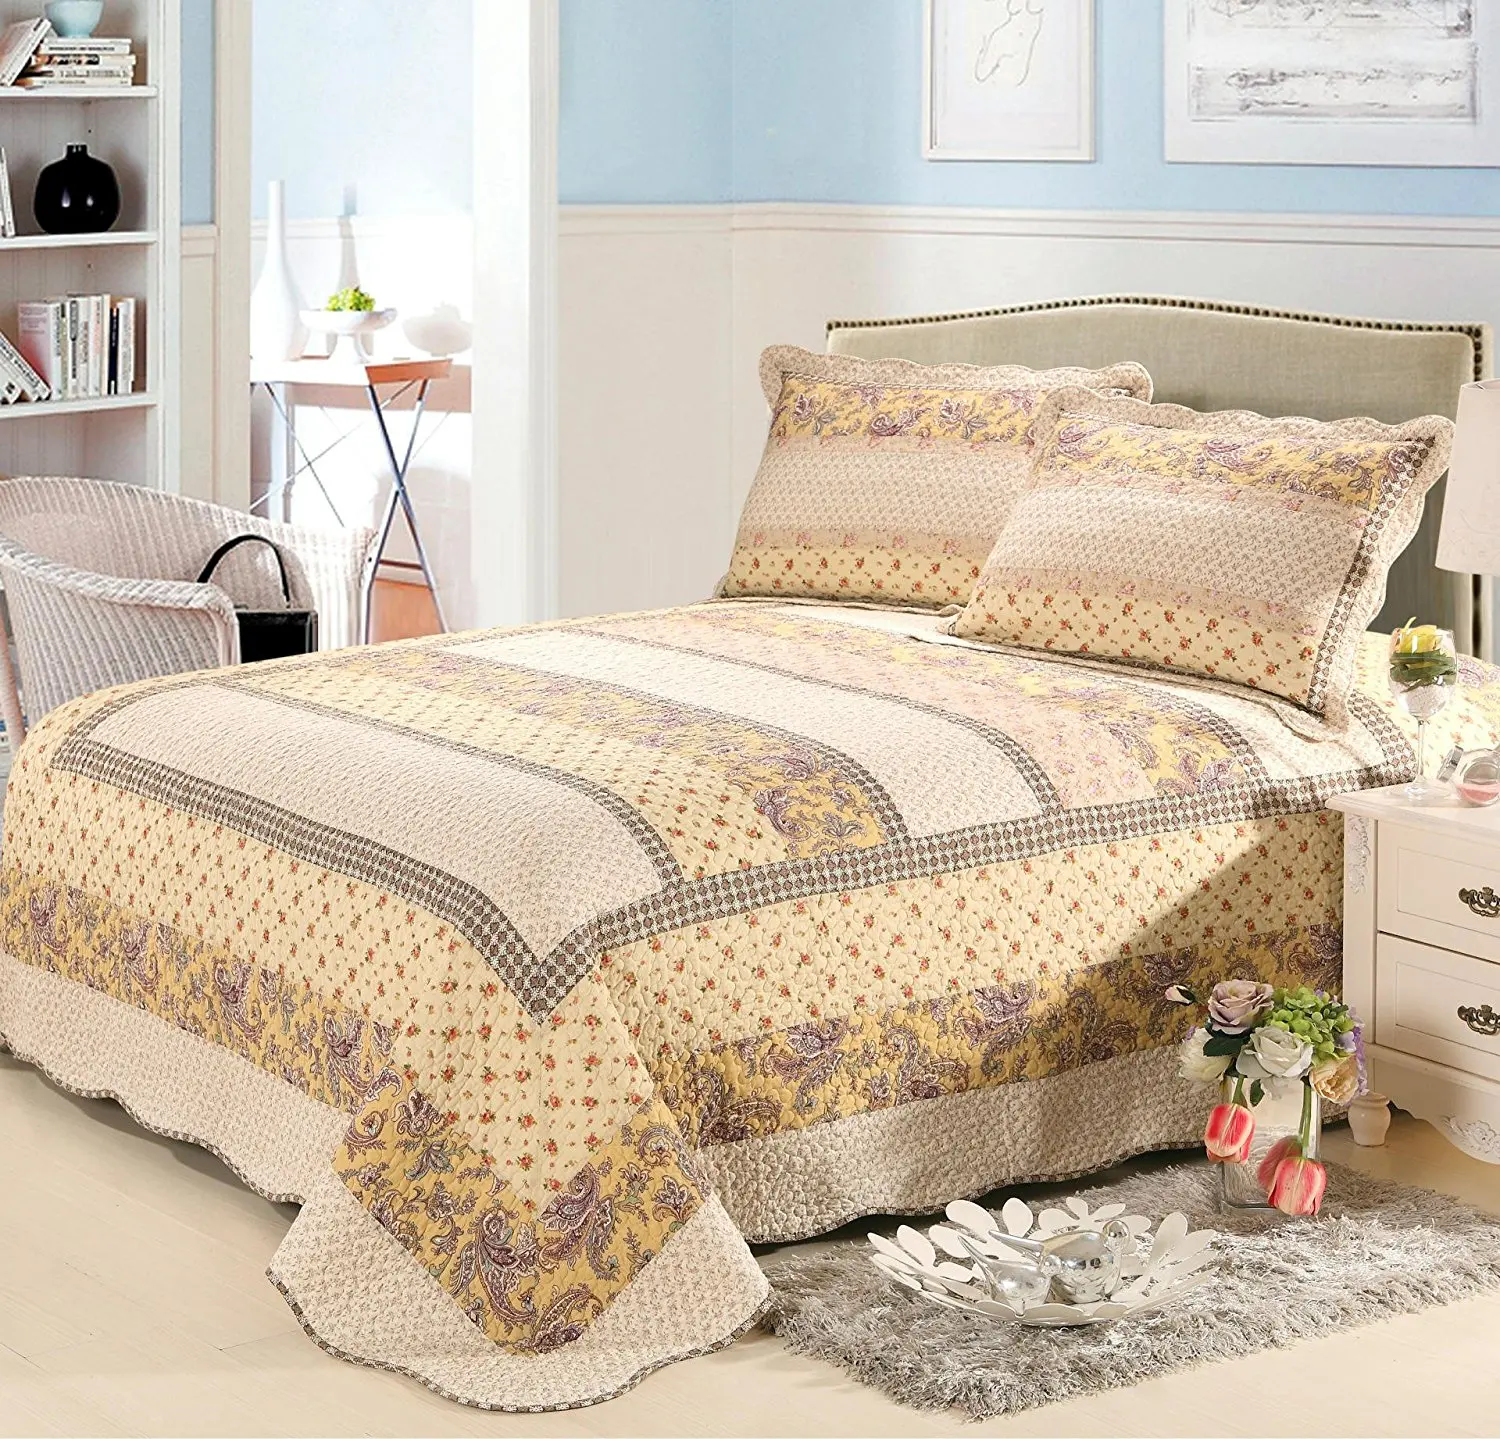 quilted bedspreads sale